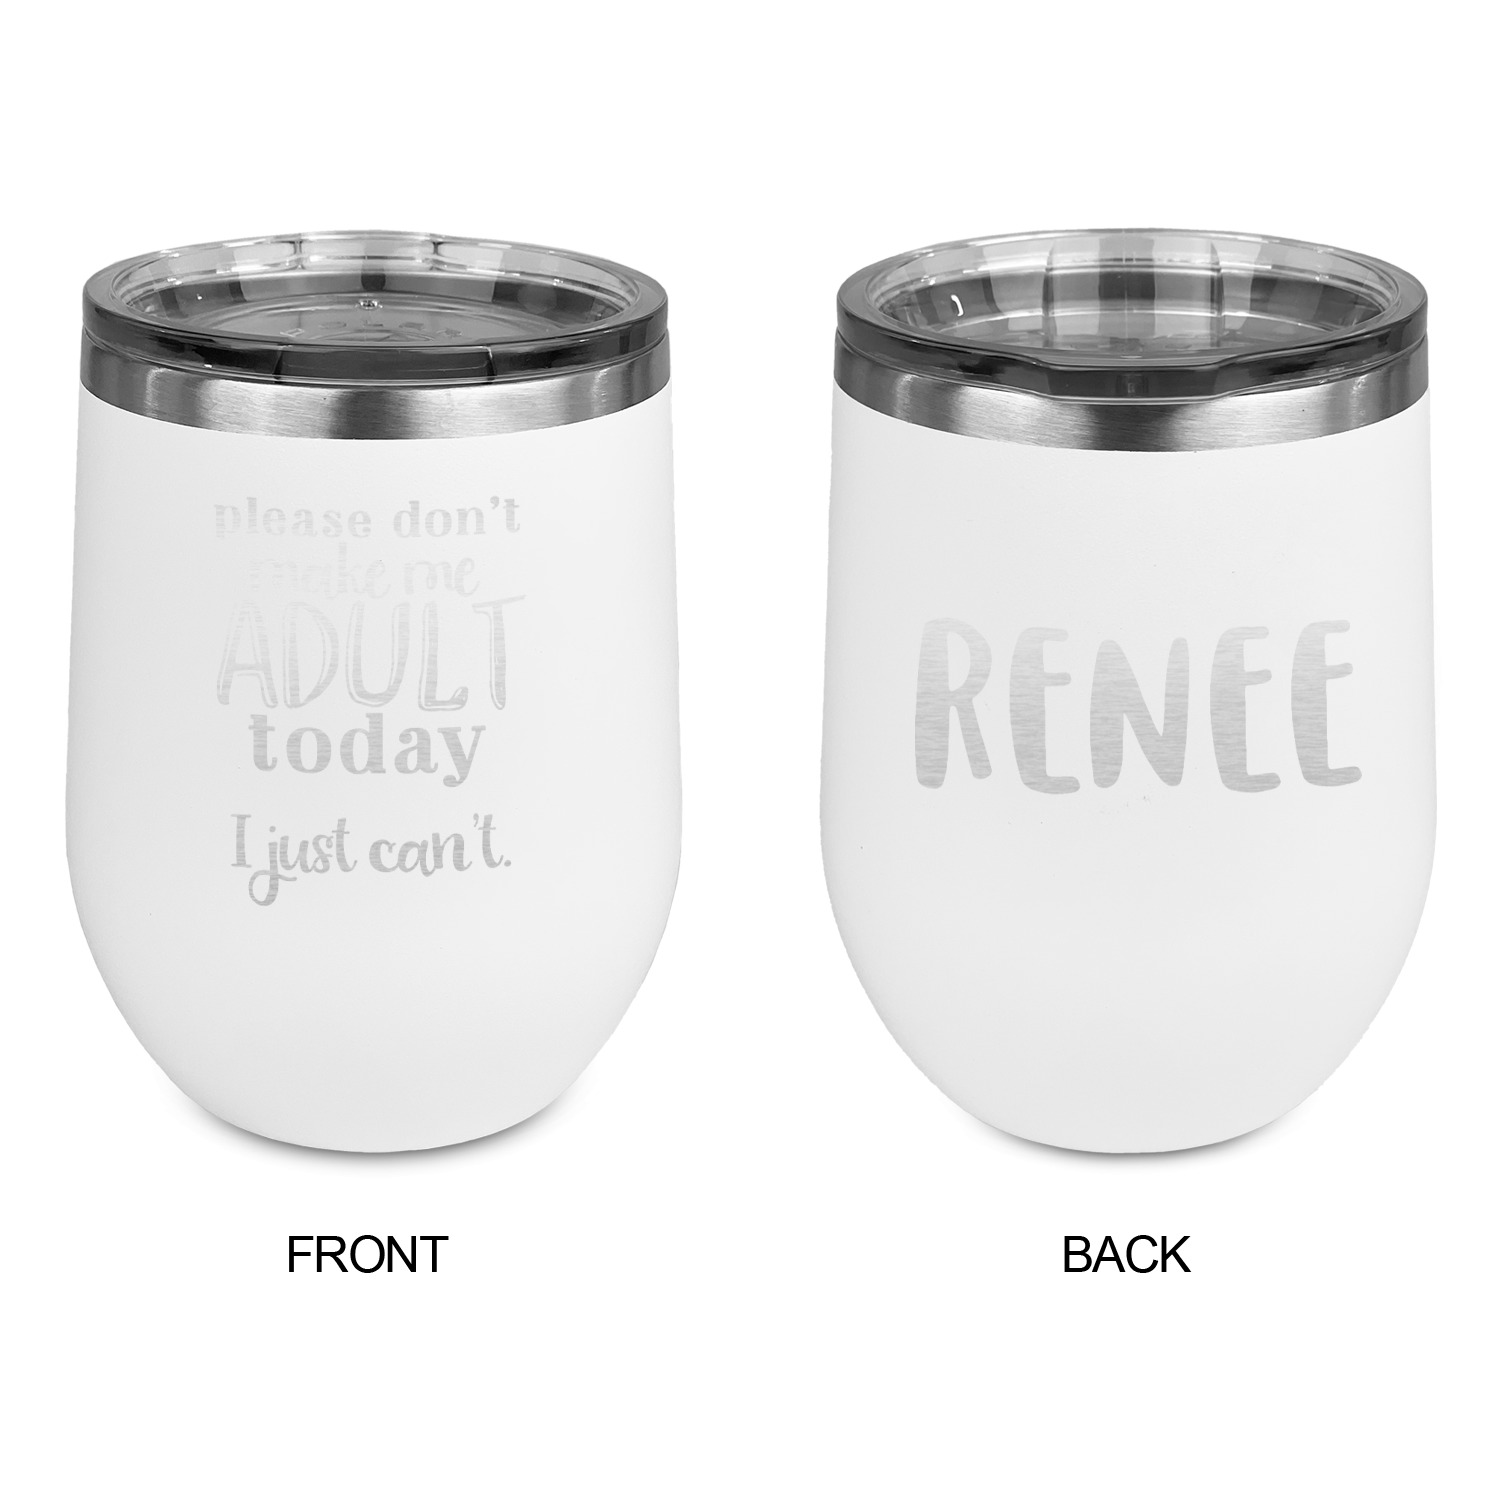 https://www.youcustomizeit.com/common/MAKE/1038321/Funny-Quotes-and-Sayings-Stainless-Wine-Tumblers-White-Double-Sided-Approval.jpg?lm=1644251363